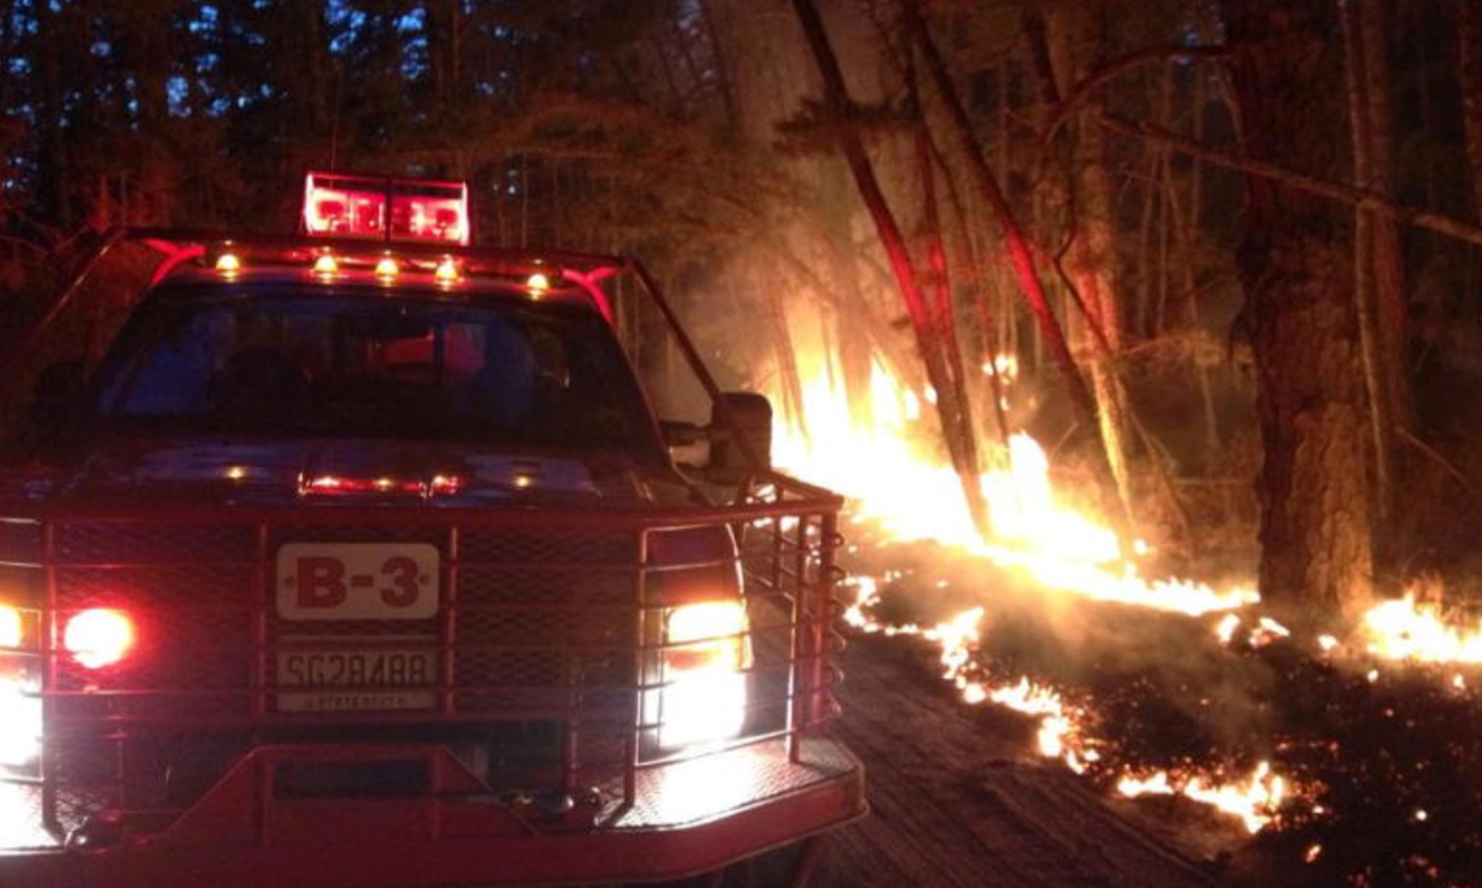  New Jersey Forest Fire Service image.  